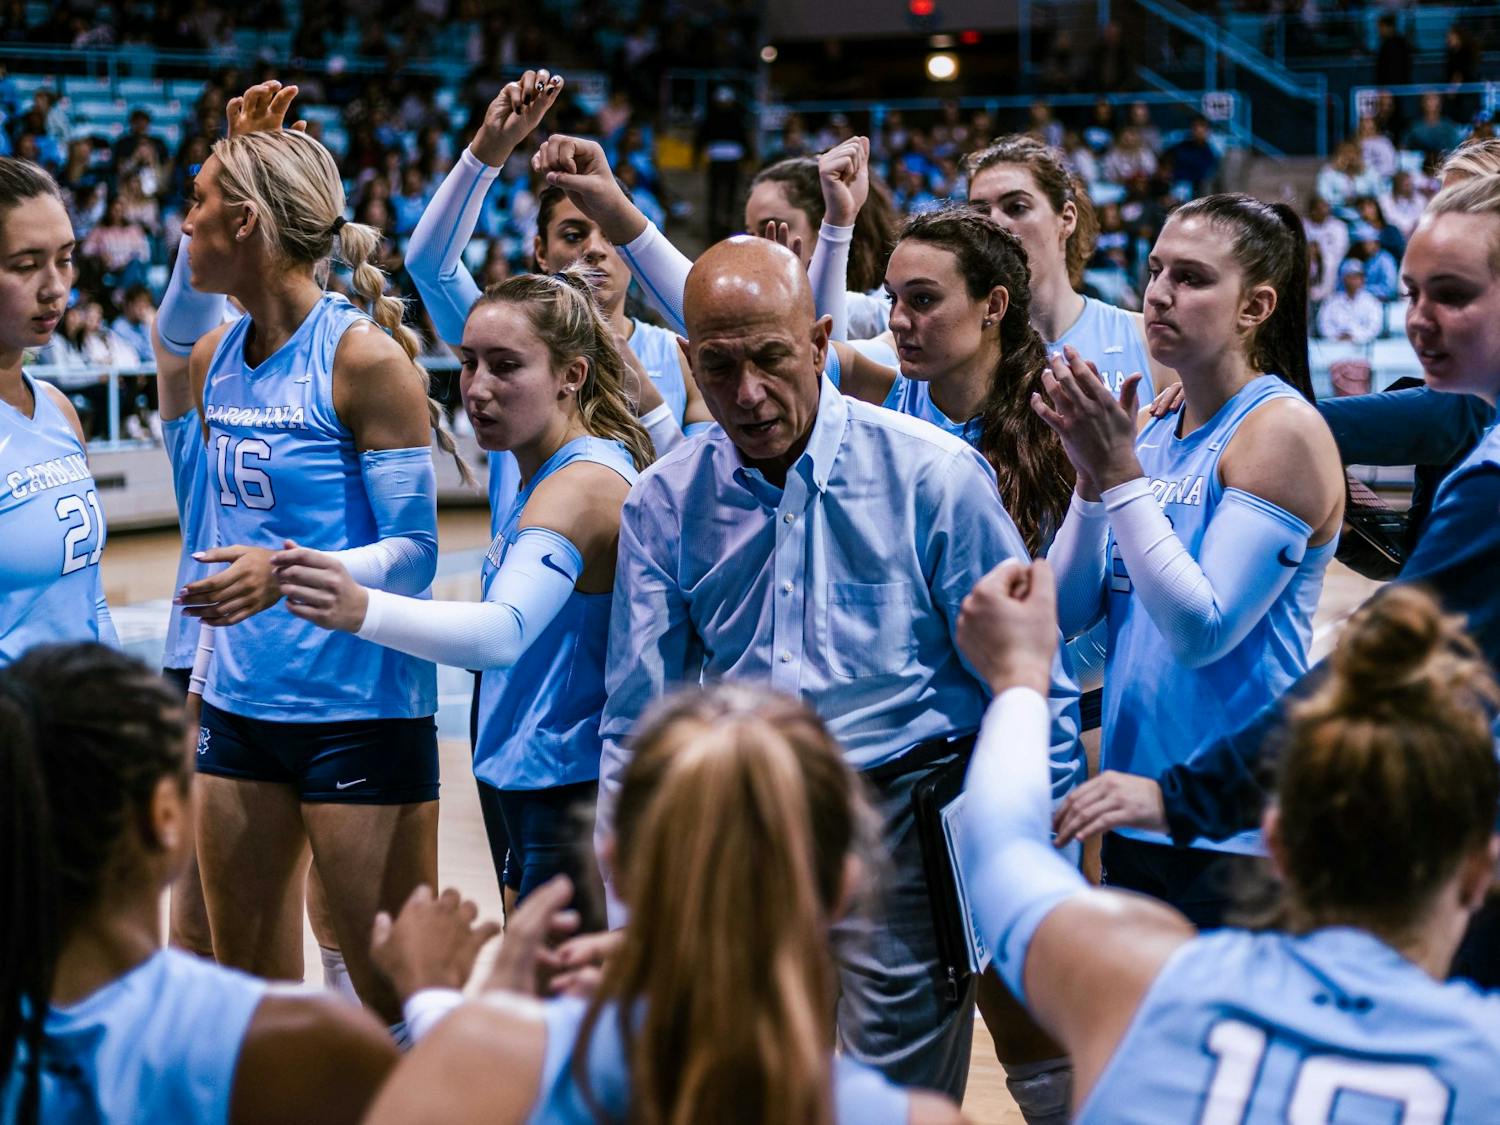 UNC head coach Joe Sagula and the team are pictured during a volleyball match against Louisville on Sunday, Nov. 13, 2022. Sagula announced his retirement in January after 33 years at the helm of UNC's program.